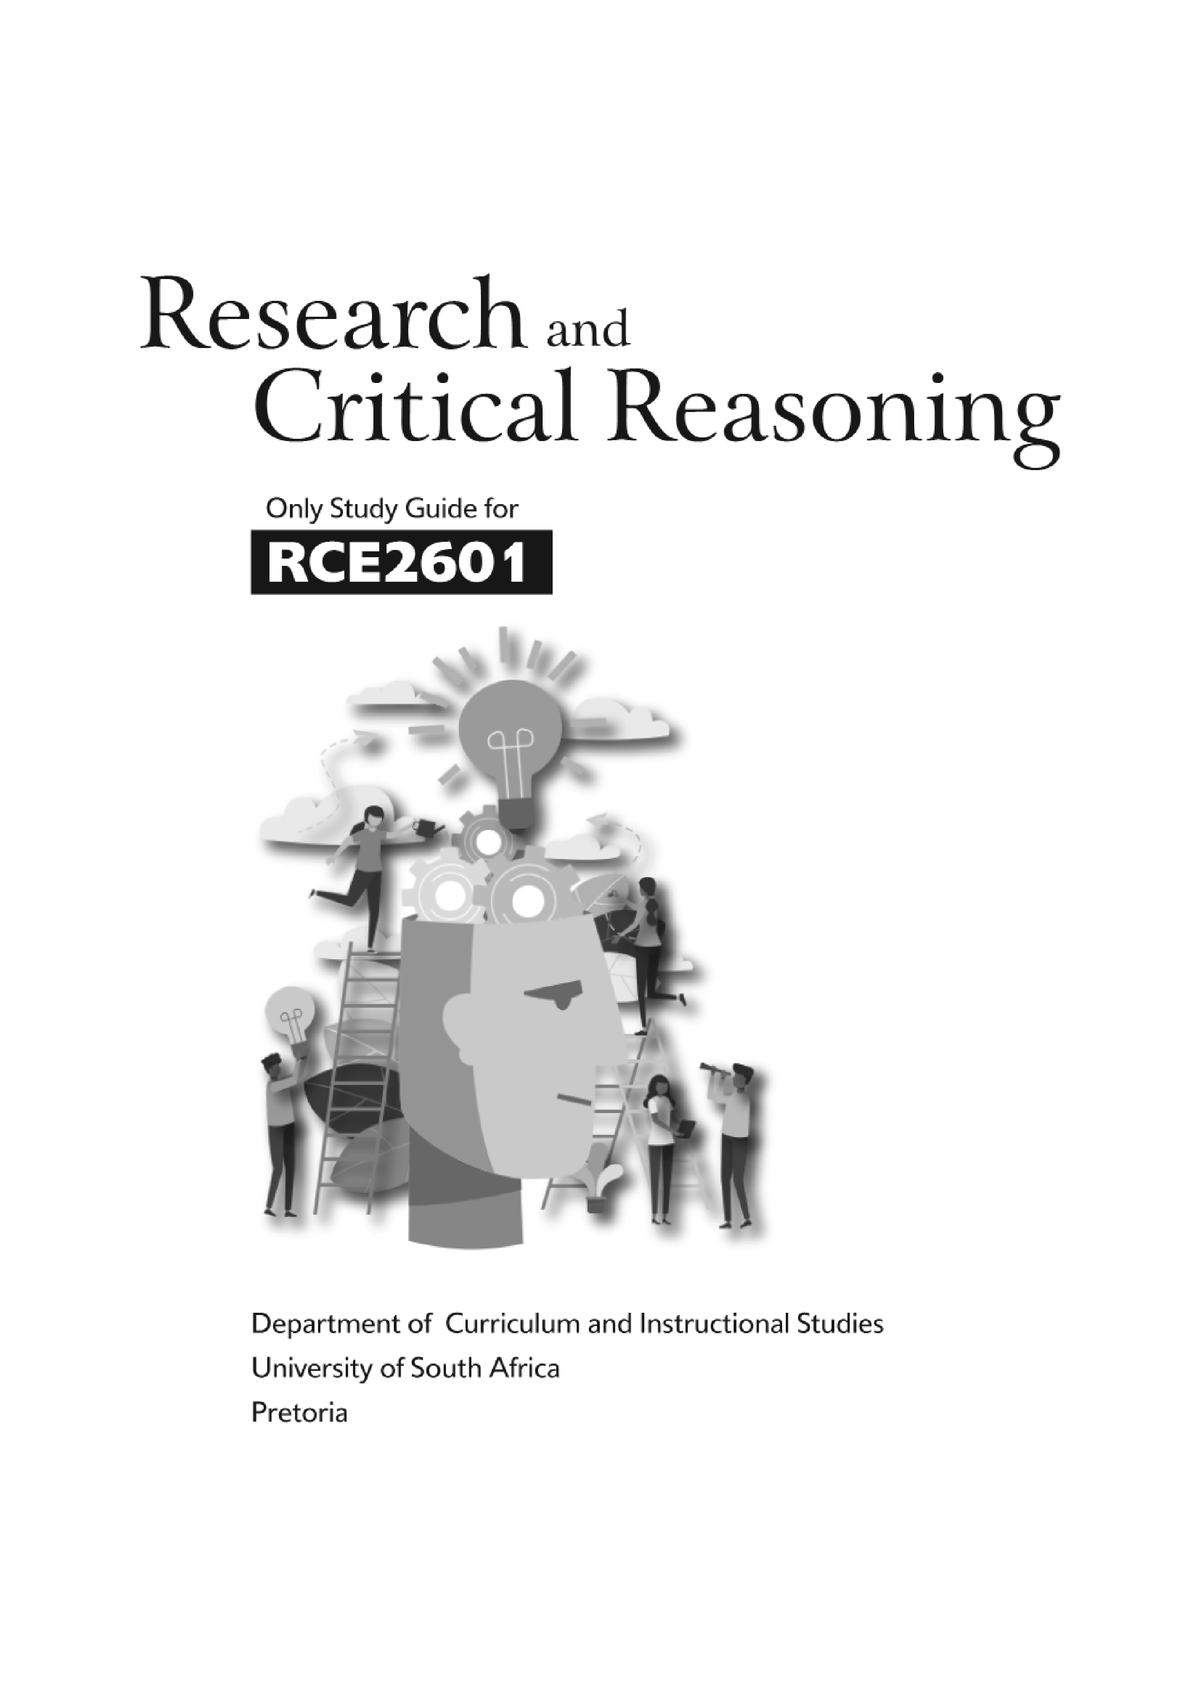 research and critical reasoning (rce2601)